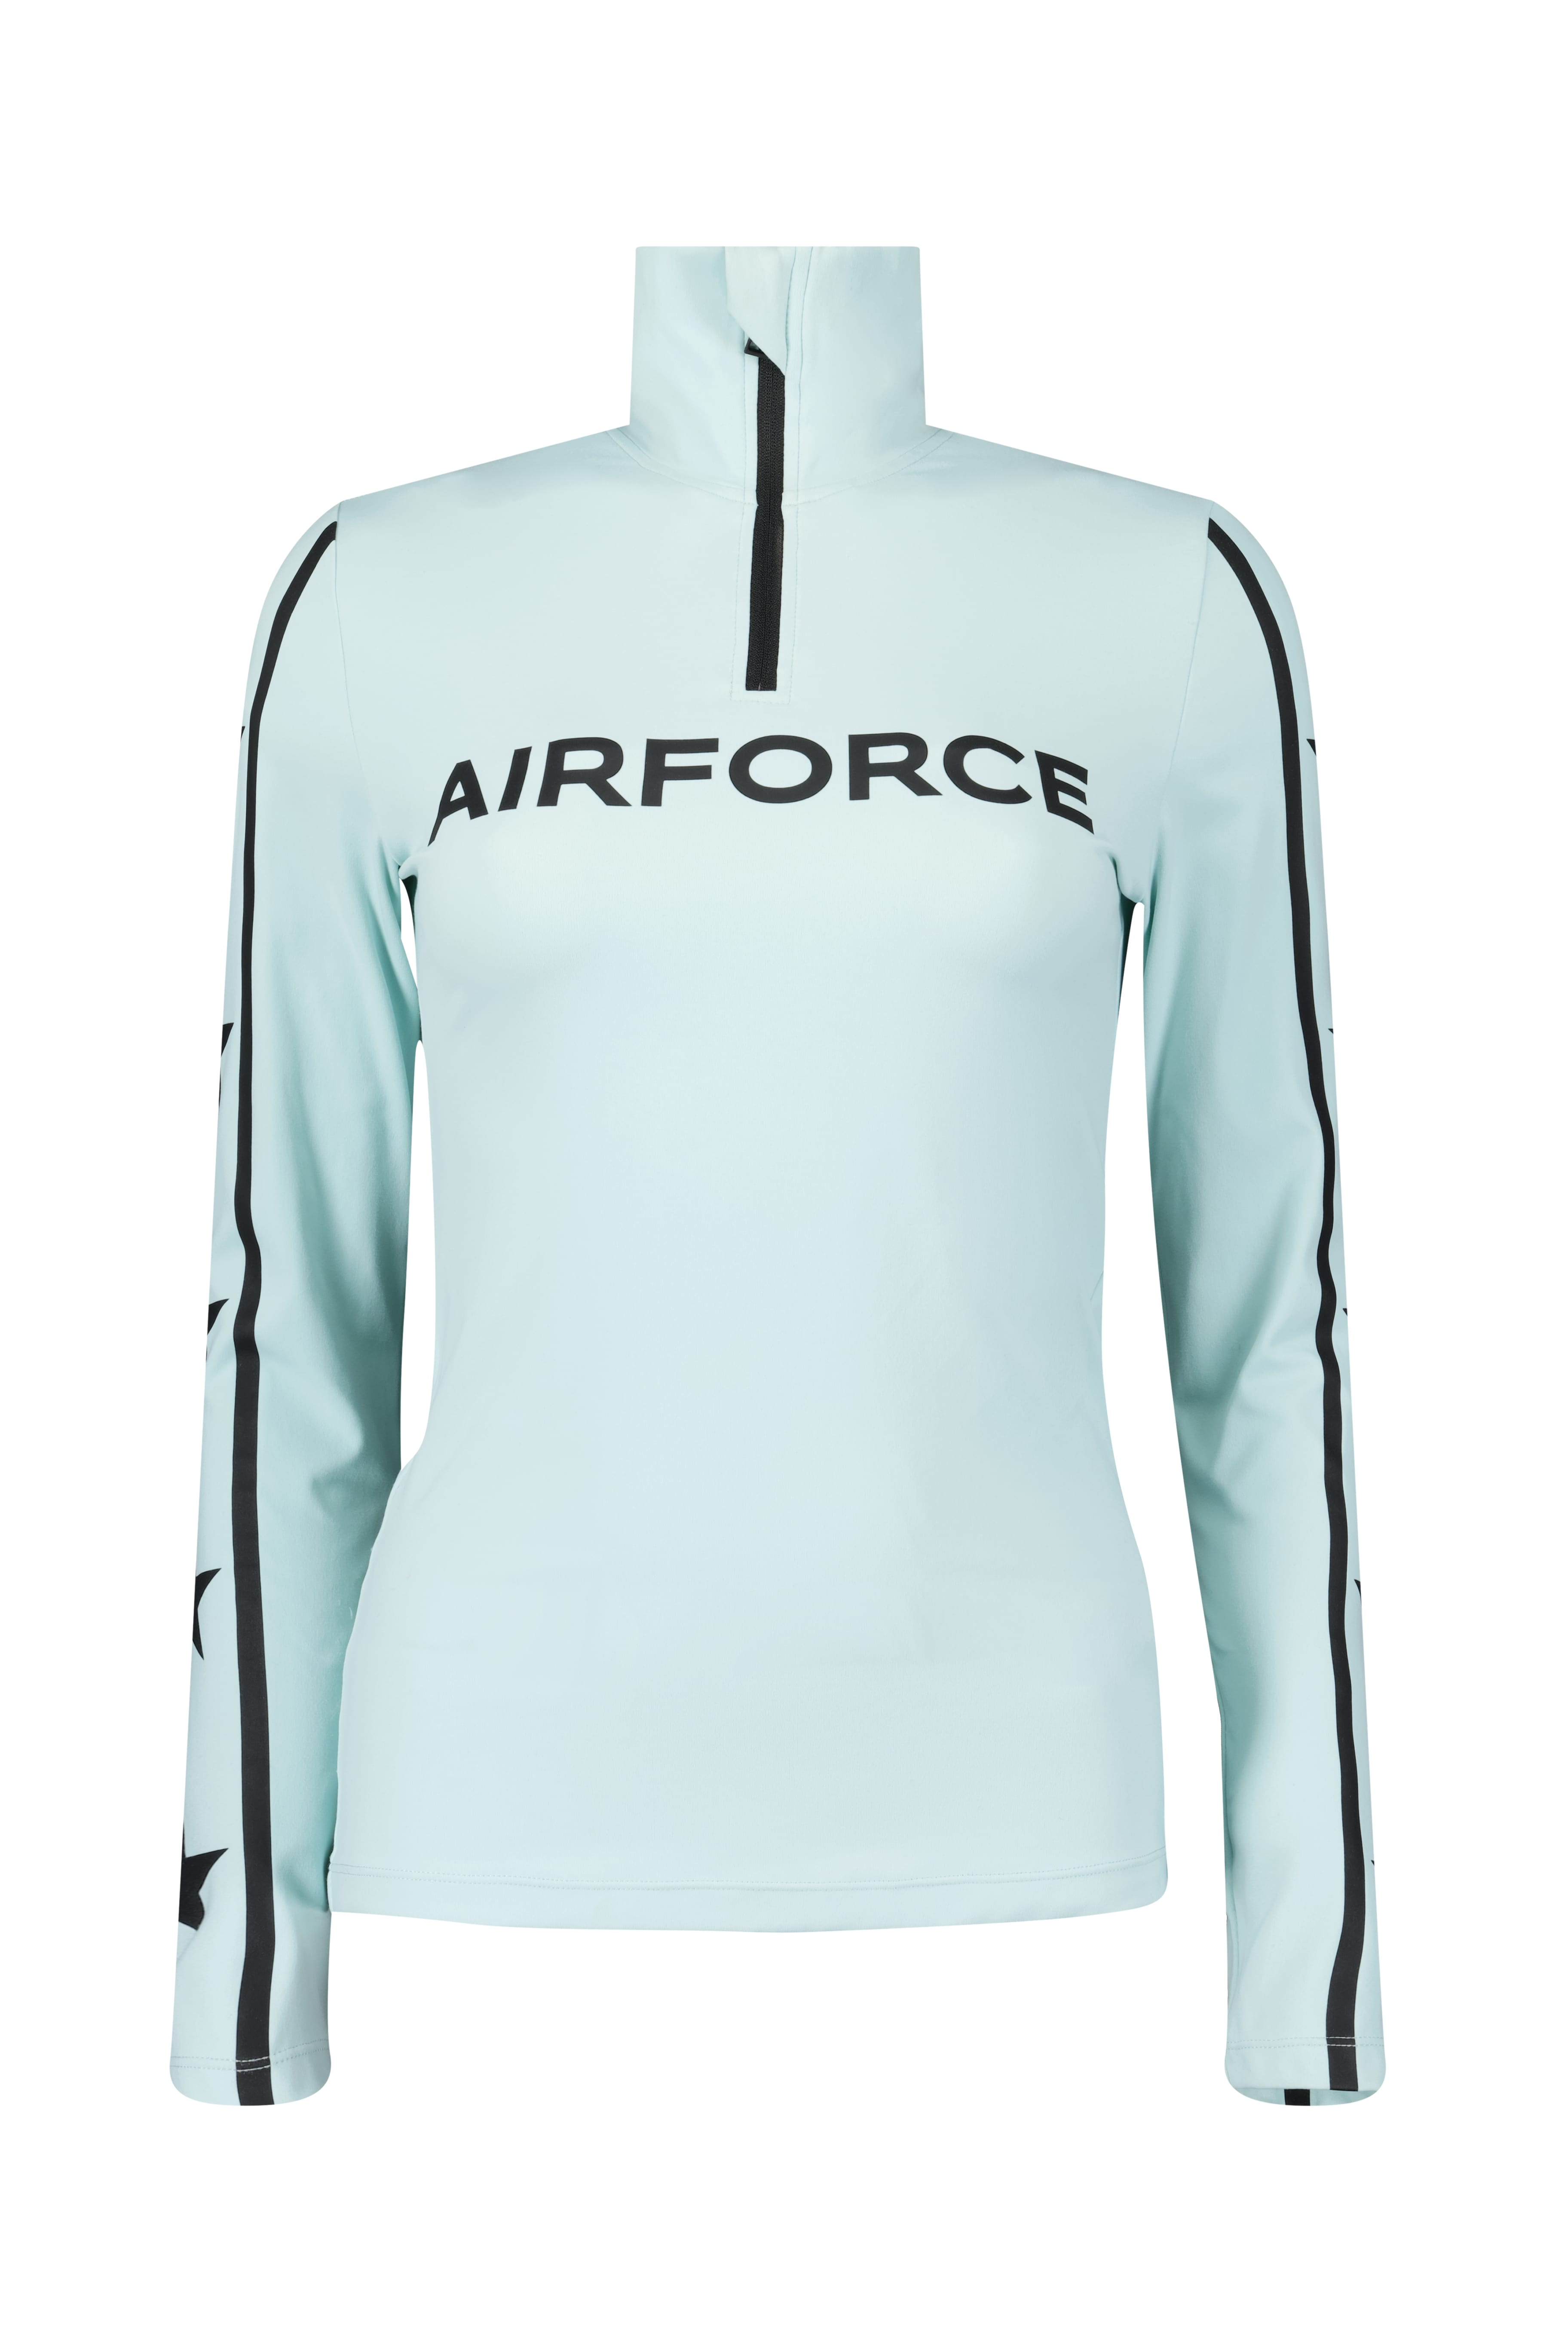 Airforce Womens Squaw Vally Pully Star